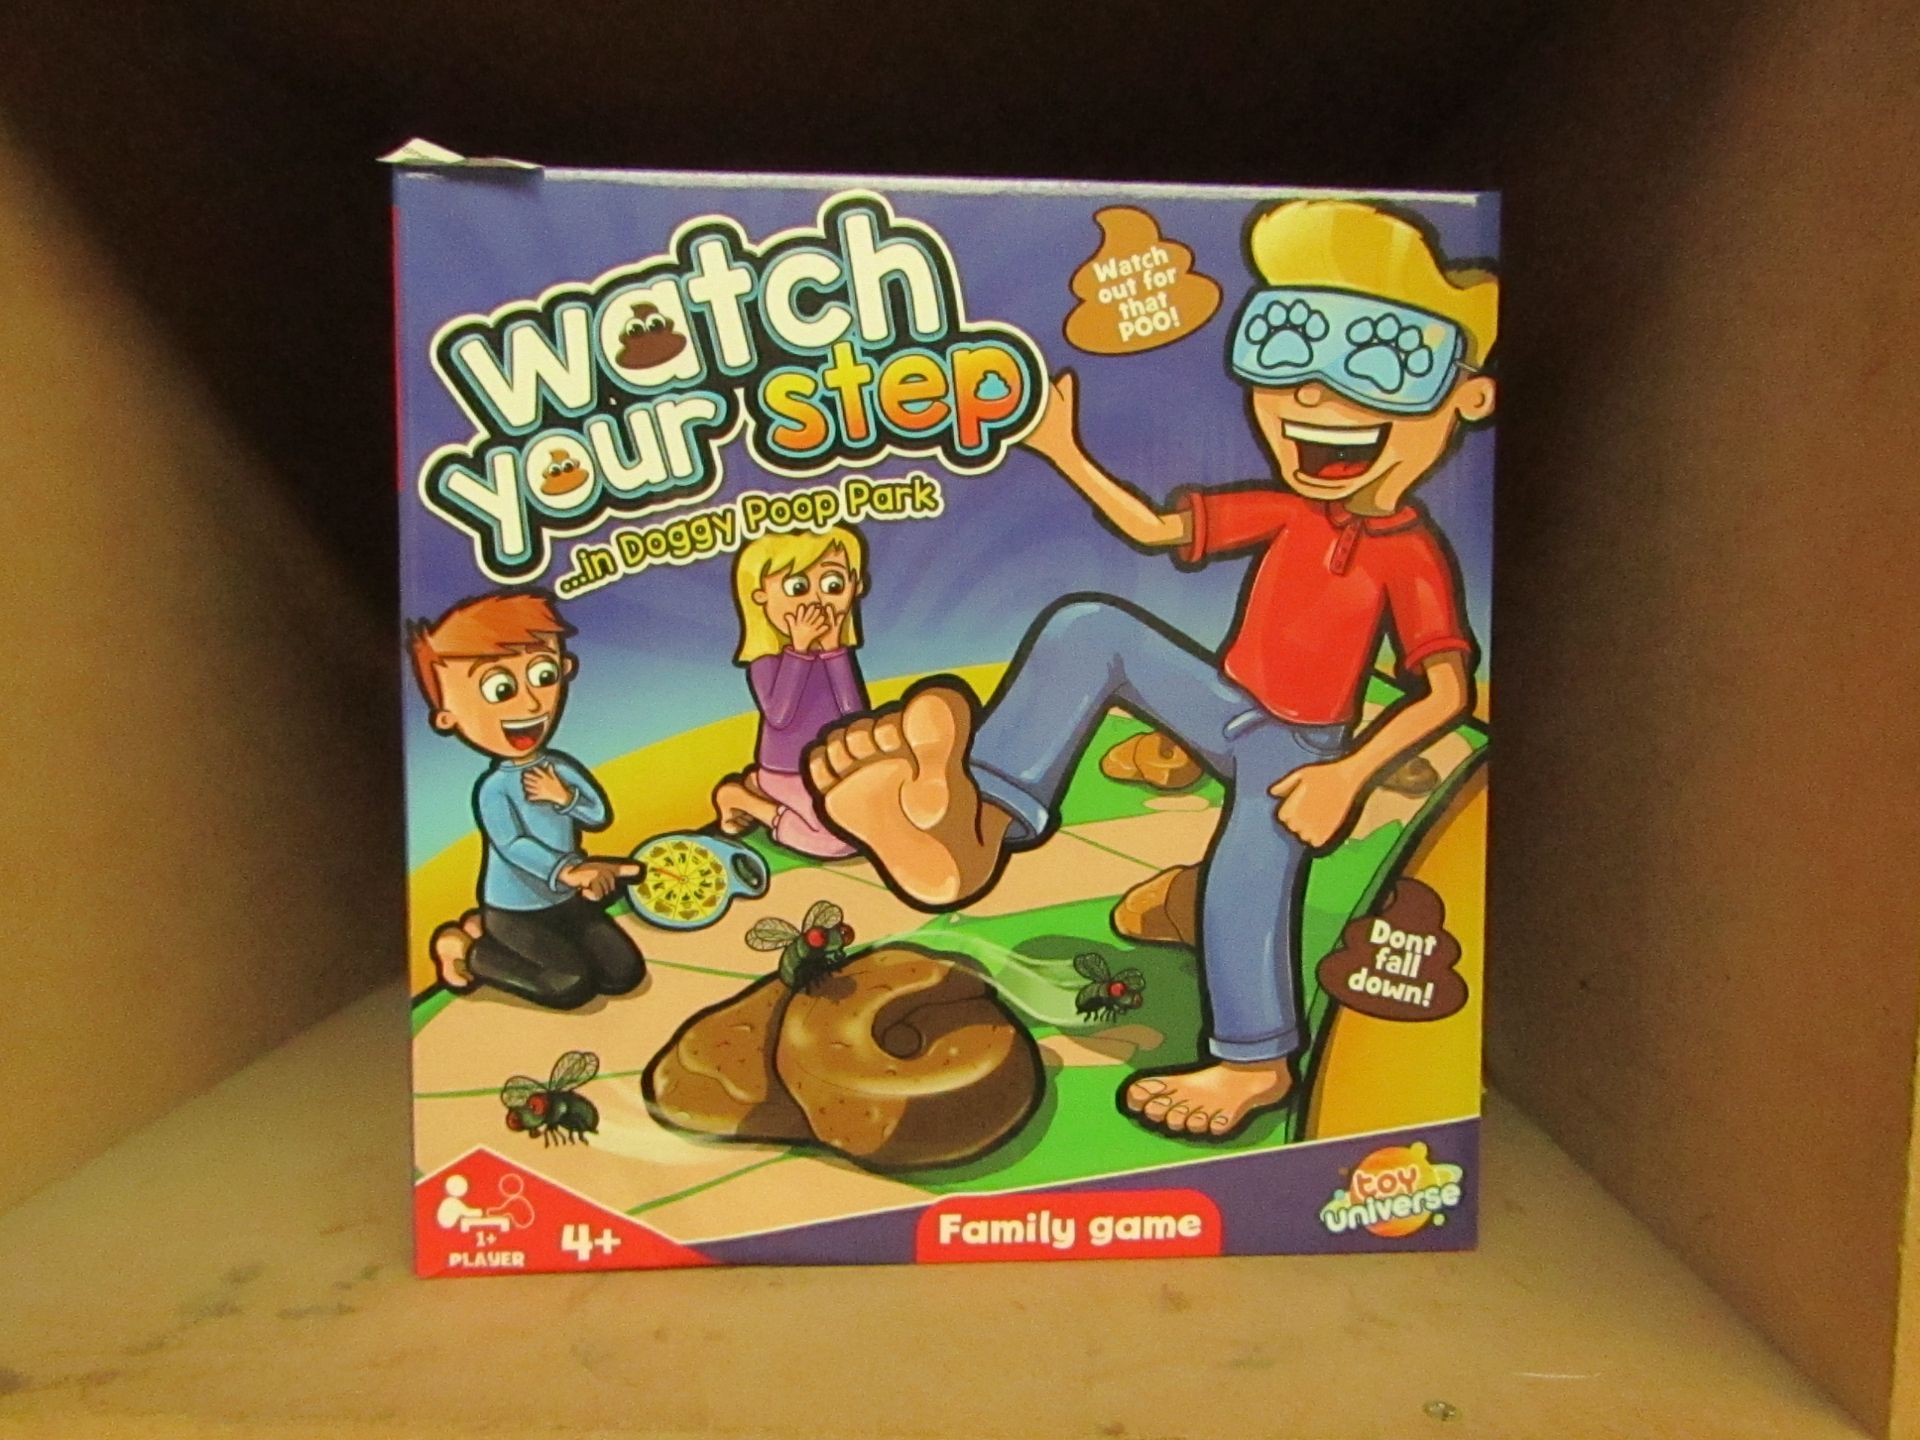 Watch Your Step In Doggy Poo Park Family game. New & Boxed